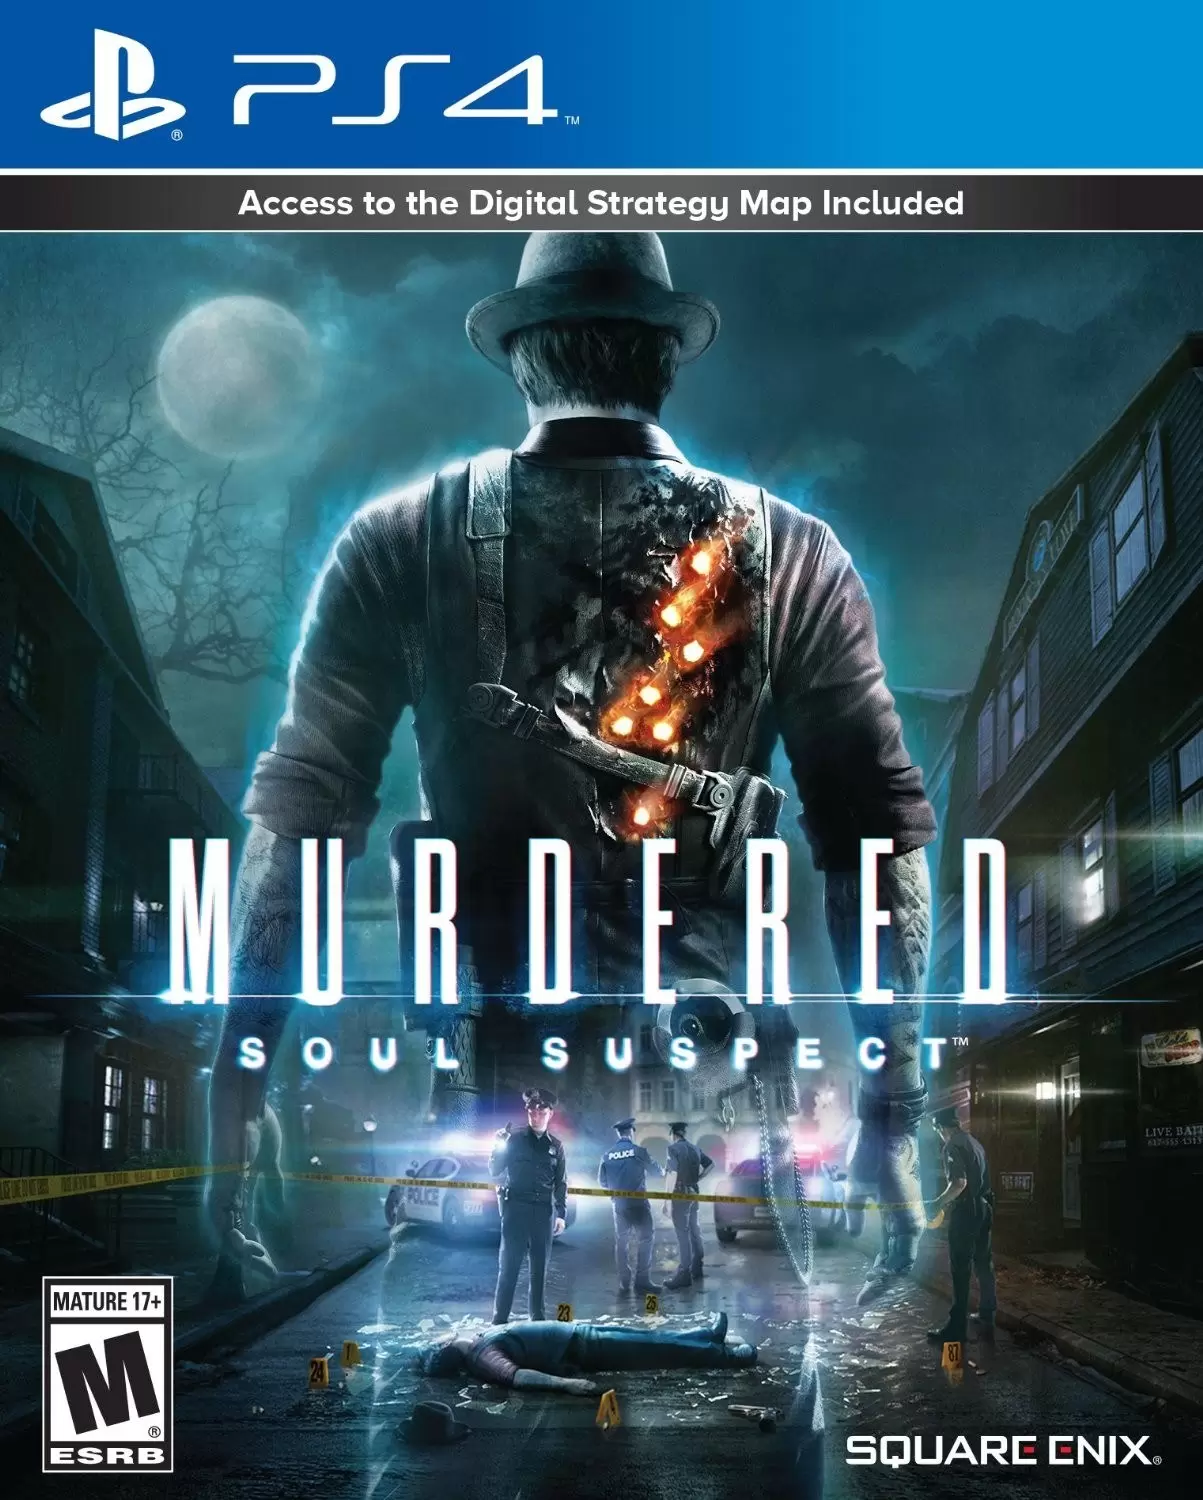 PS4 Games - Murdered: Soul Suspect